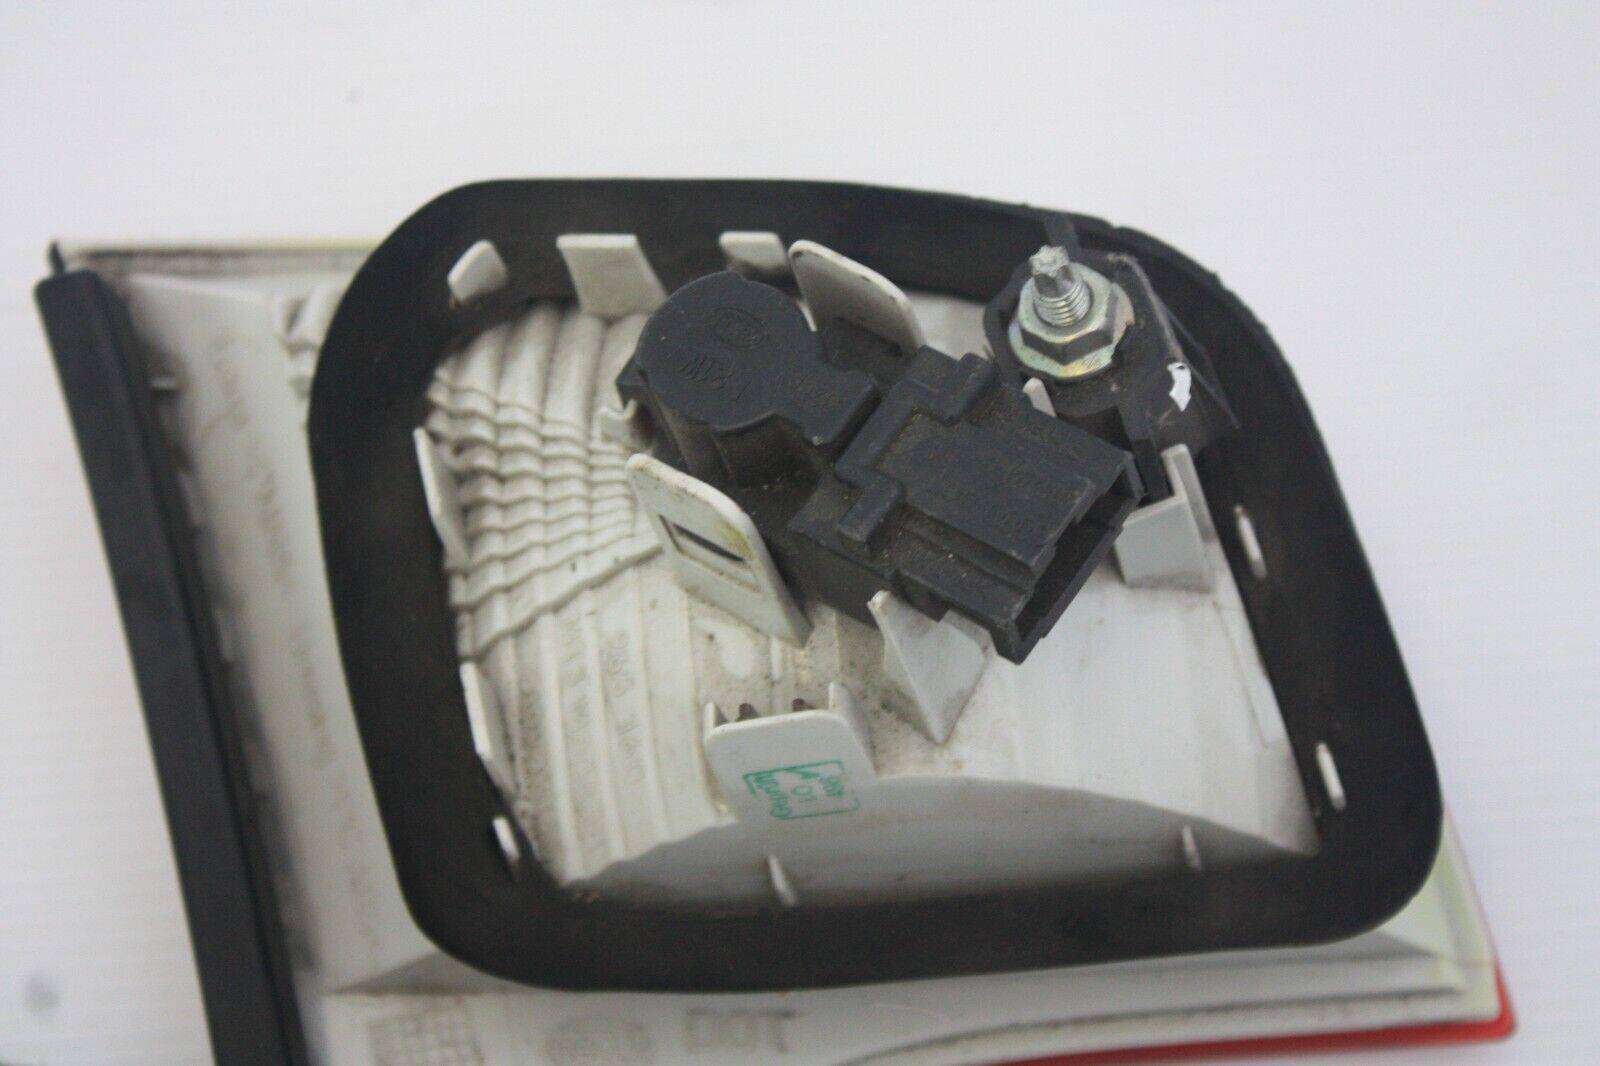 Audi-A4-B7-Right-Side-Tail-Light-2005-TO-2008-8E5945094A-Genuine-175491221880-12